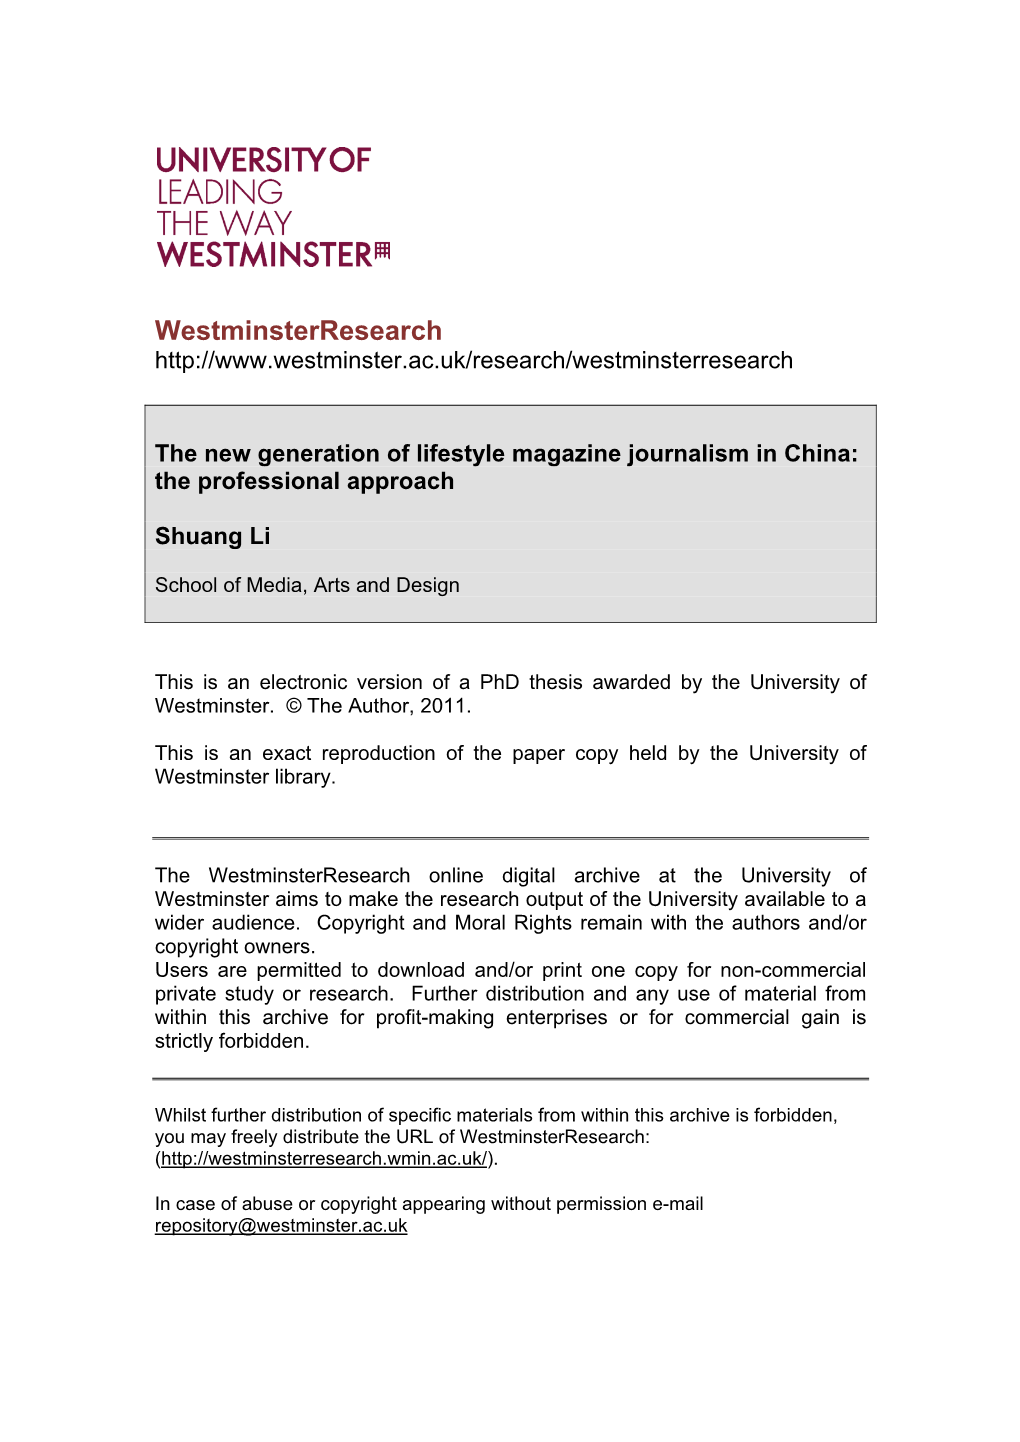 The New Generation of Lifestyle Magazine Journalism in China: the Professional Approach